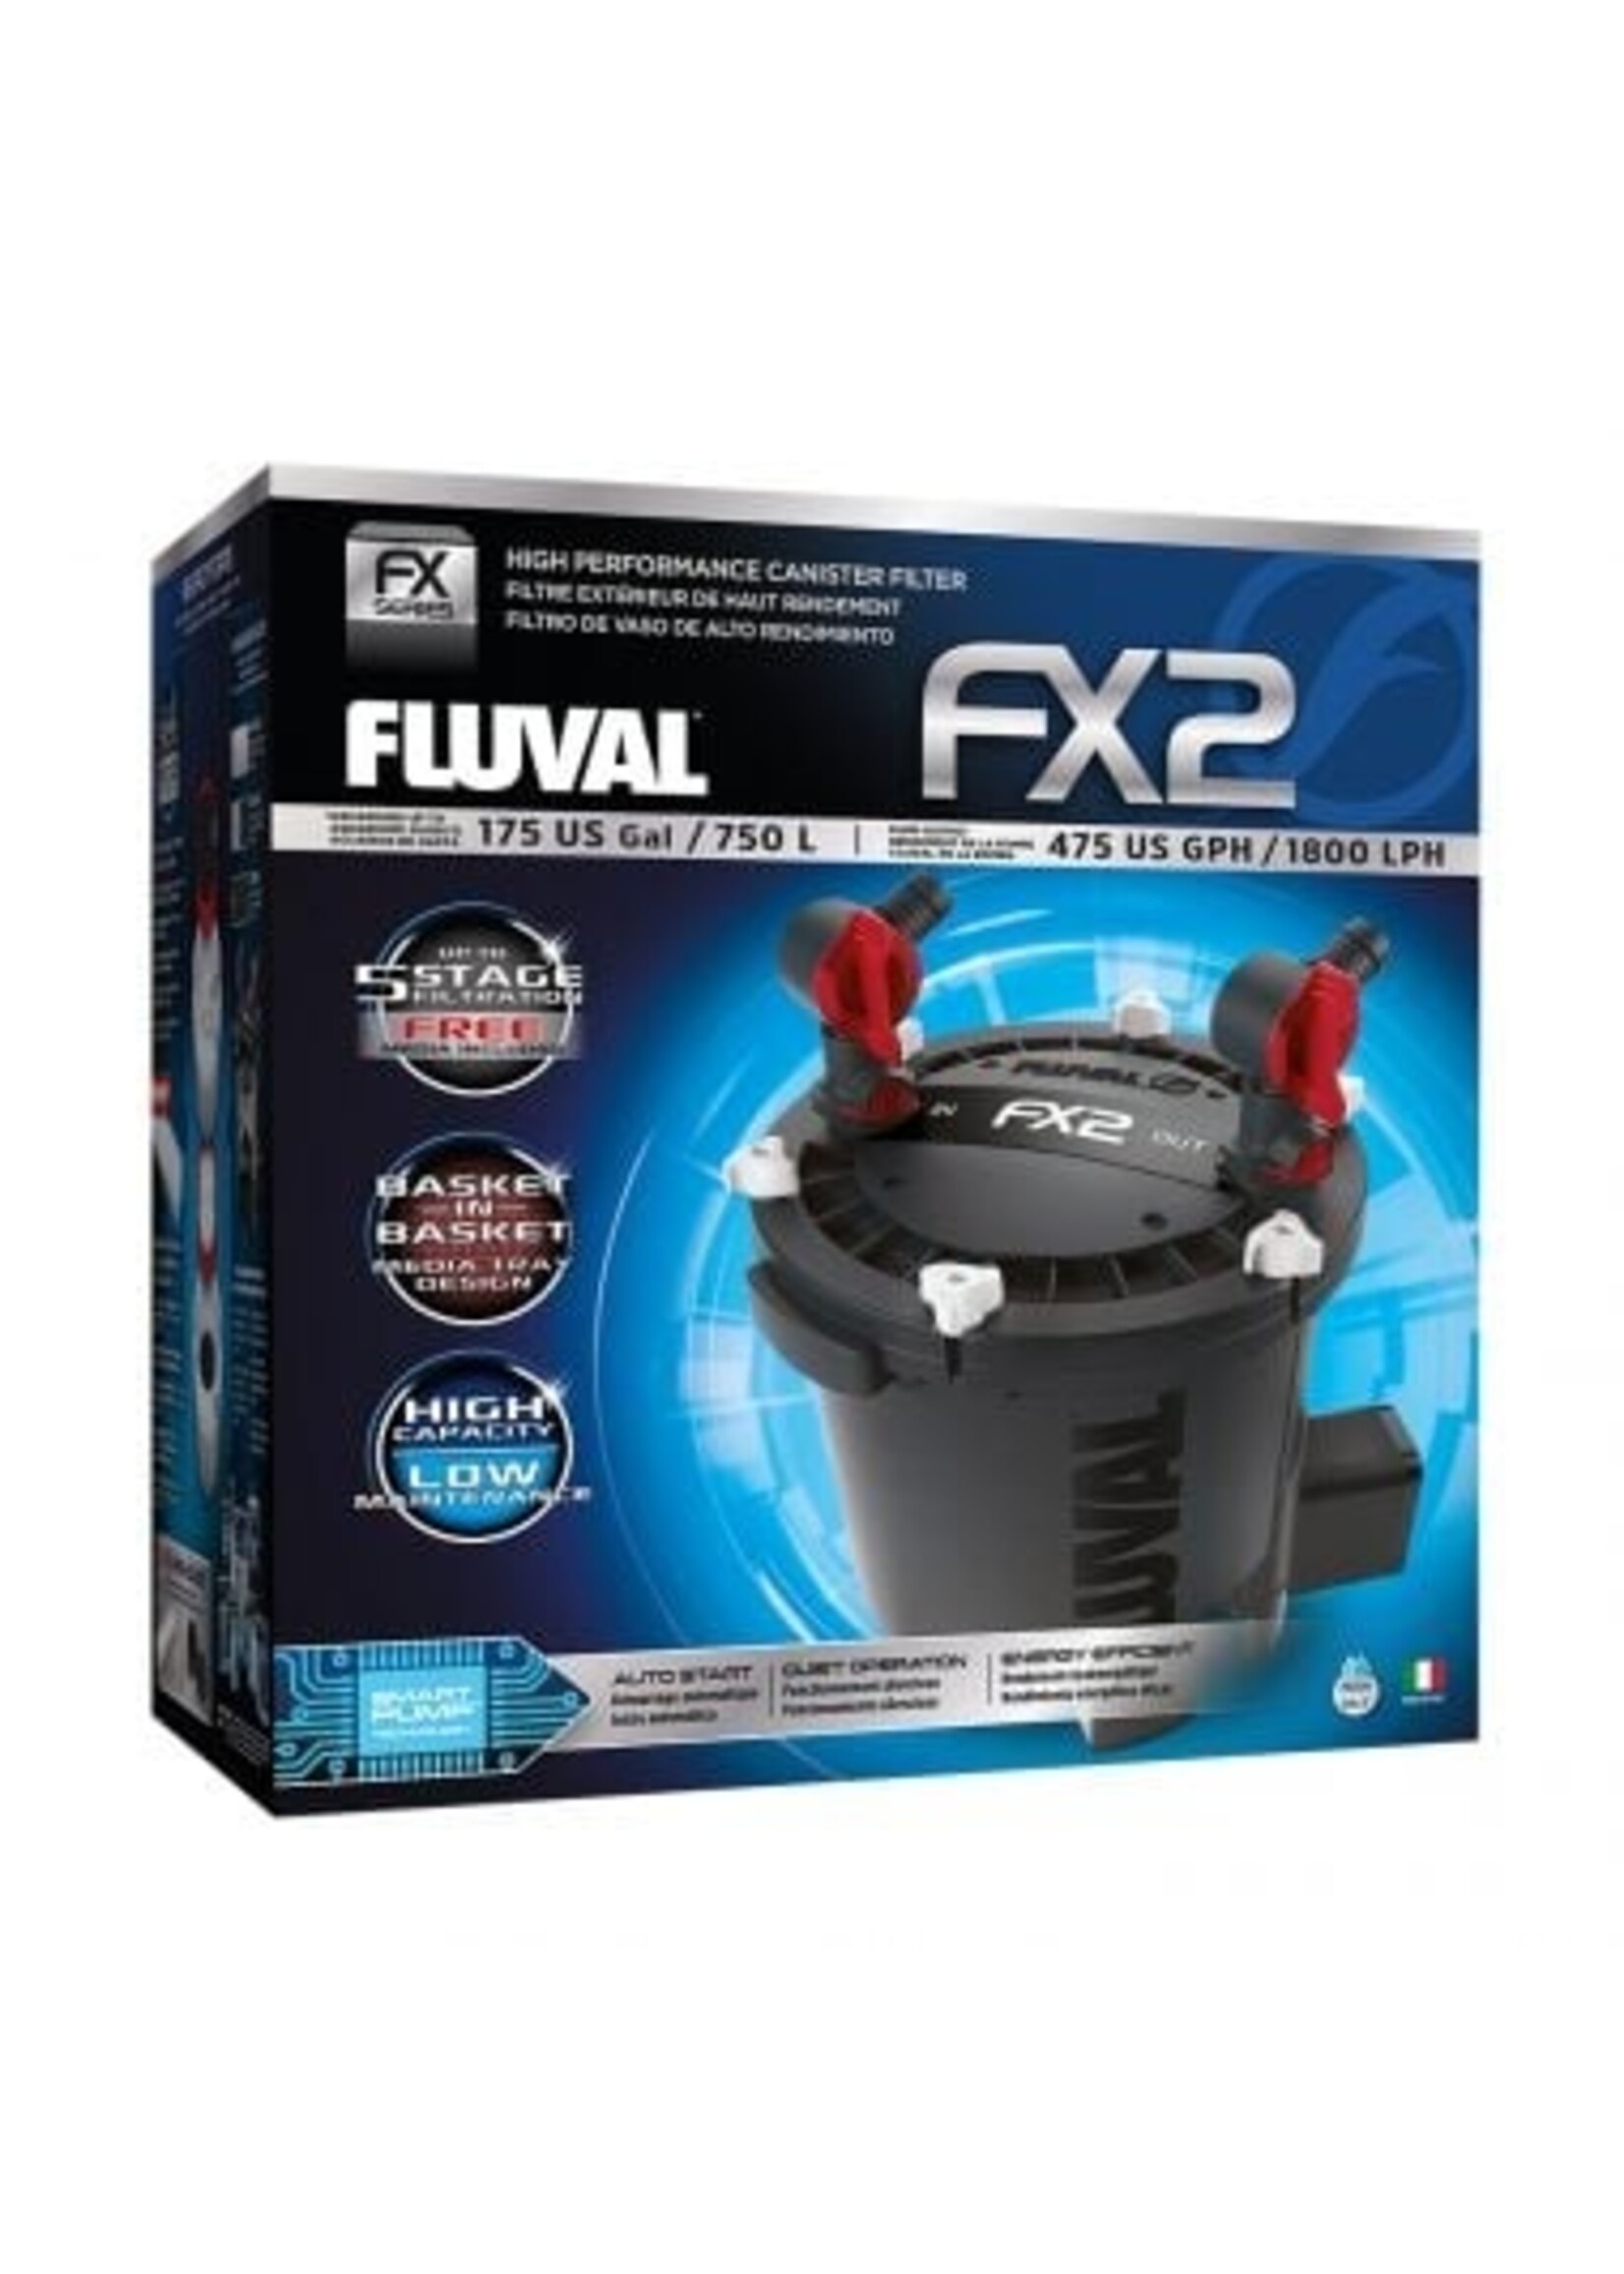 Fluval Fluval FX2 High Performance Canister Filter up to 750 L (175us gal)